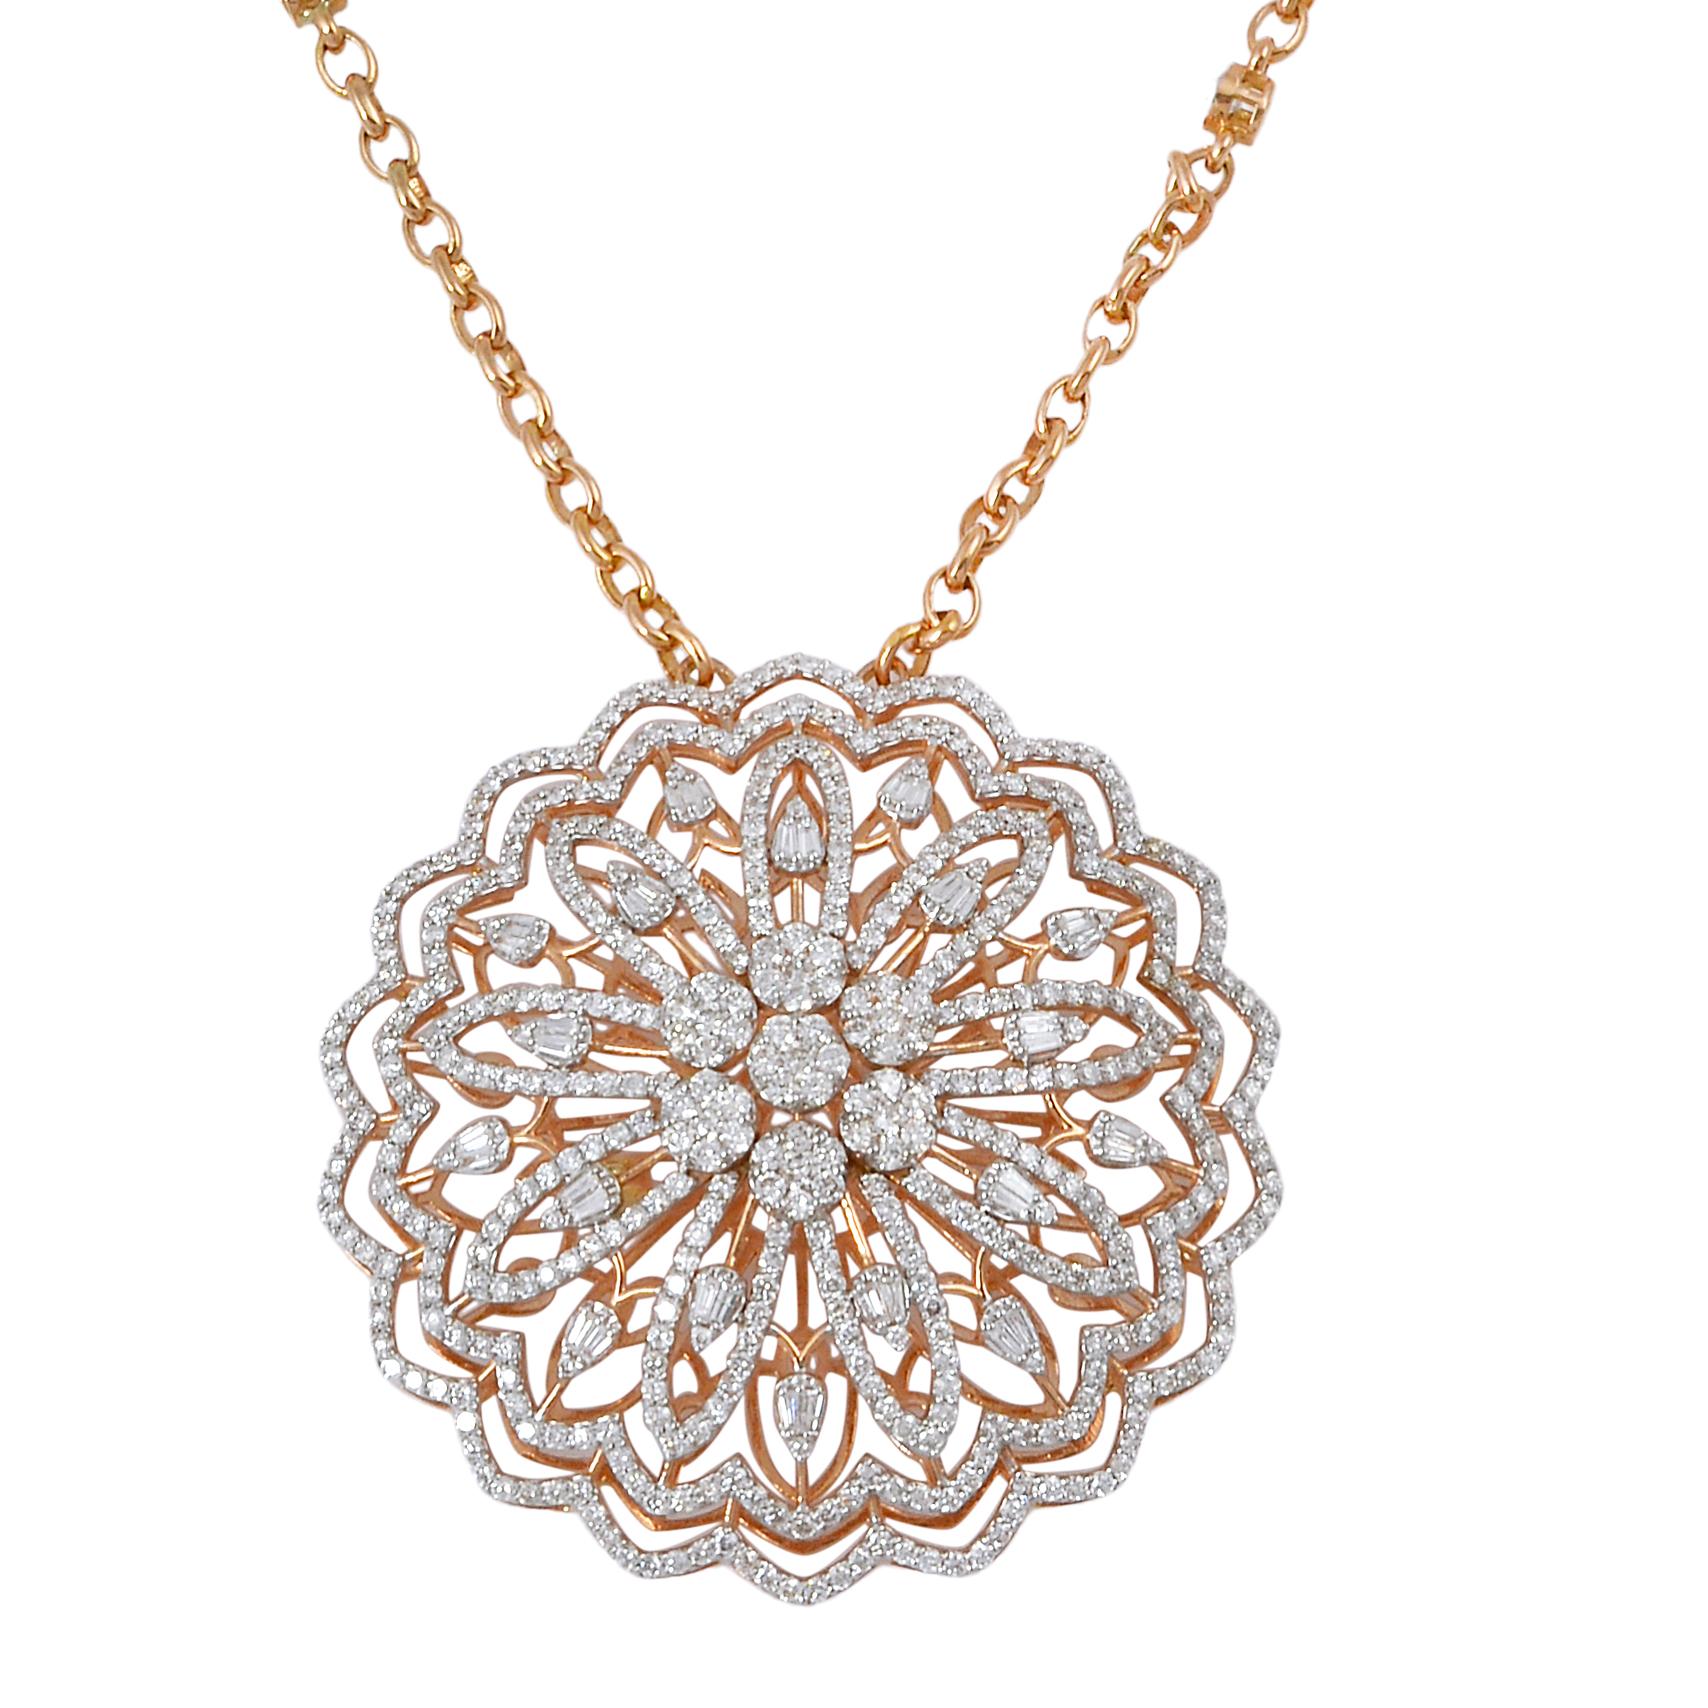 The rose gold setting beautifully complements the diamonds, adding a warm and romantic touch to the necklace. The 18 Karat gold is known for its luxurious and enduring quality, making this necklace a timeless treasure that will be cherished for